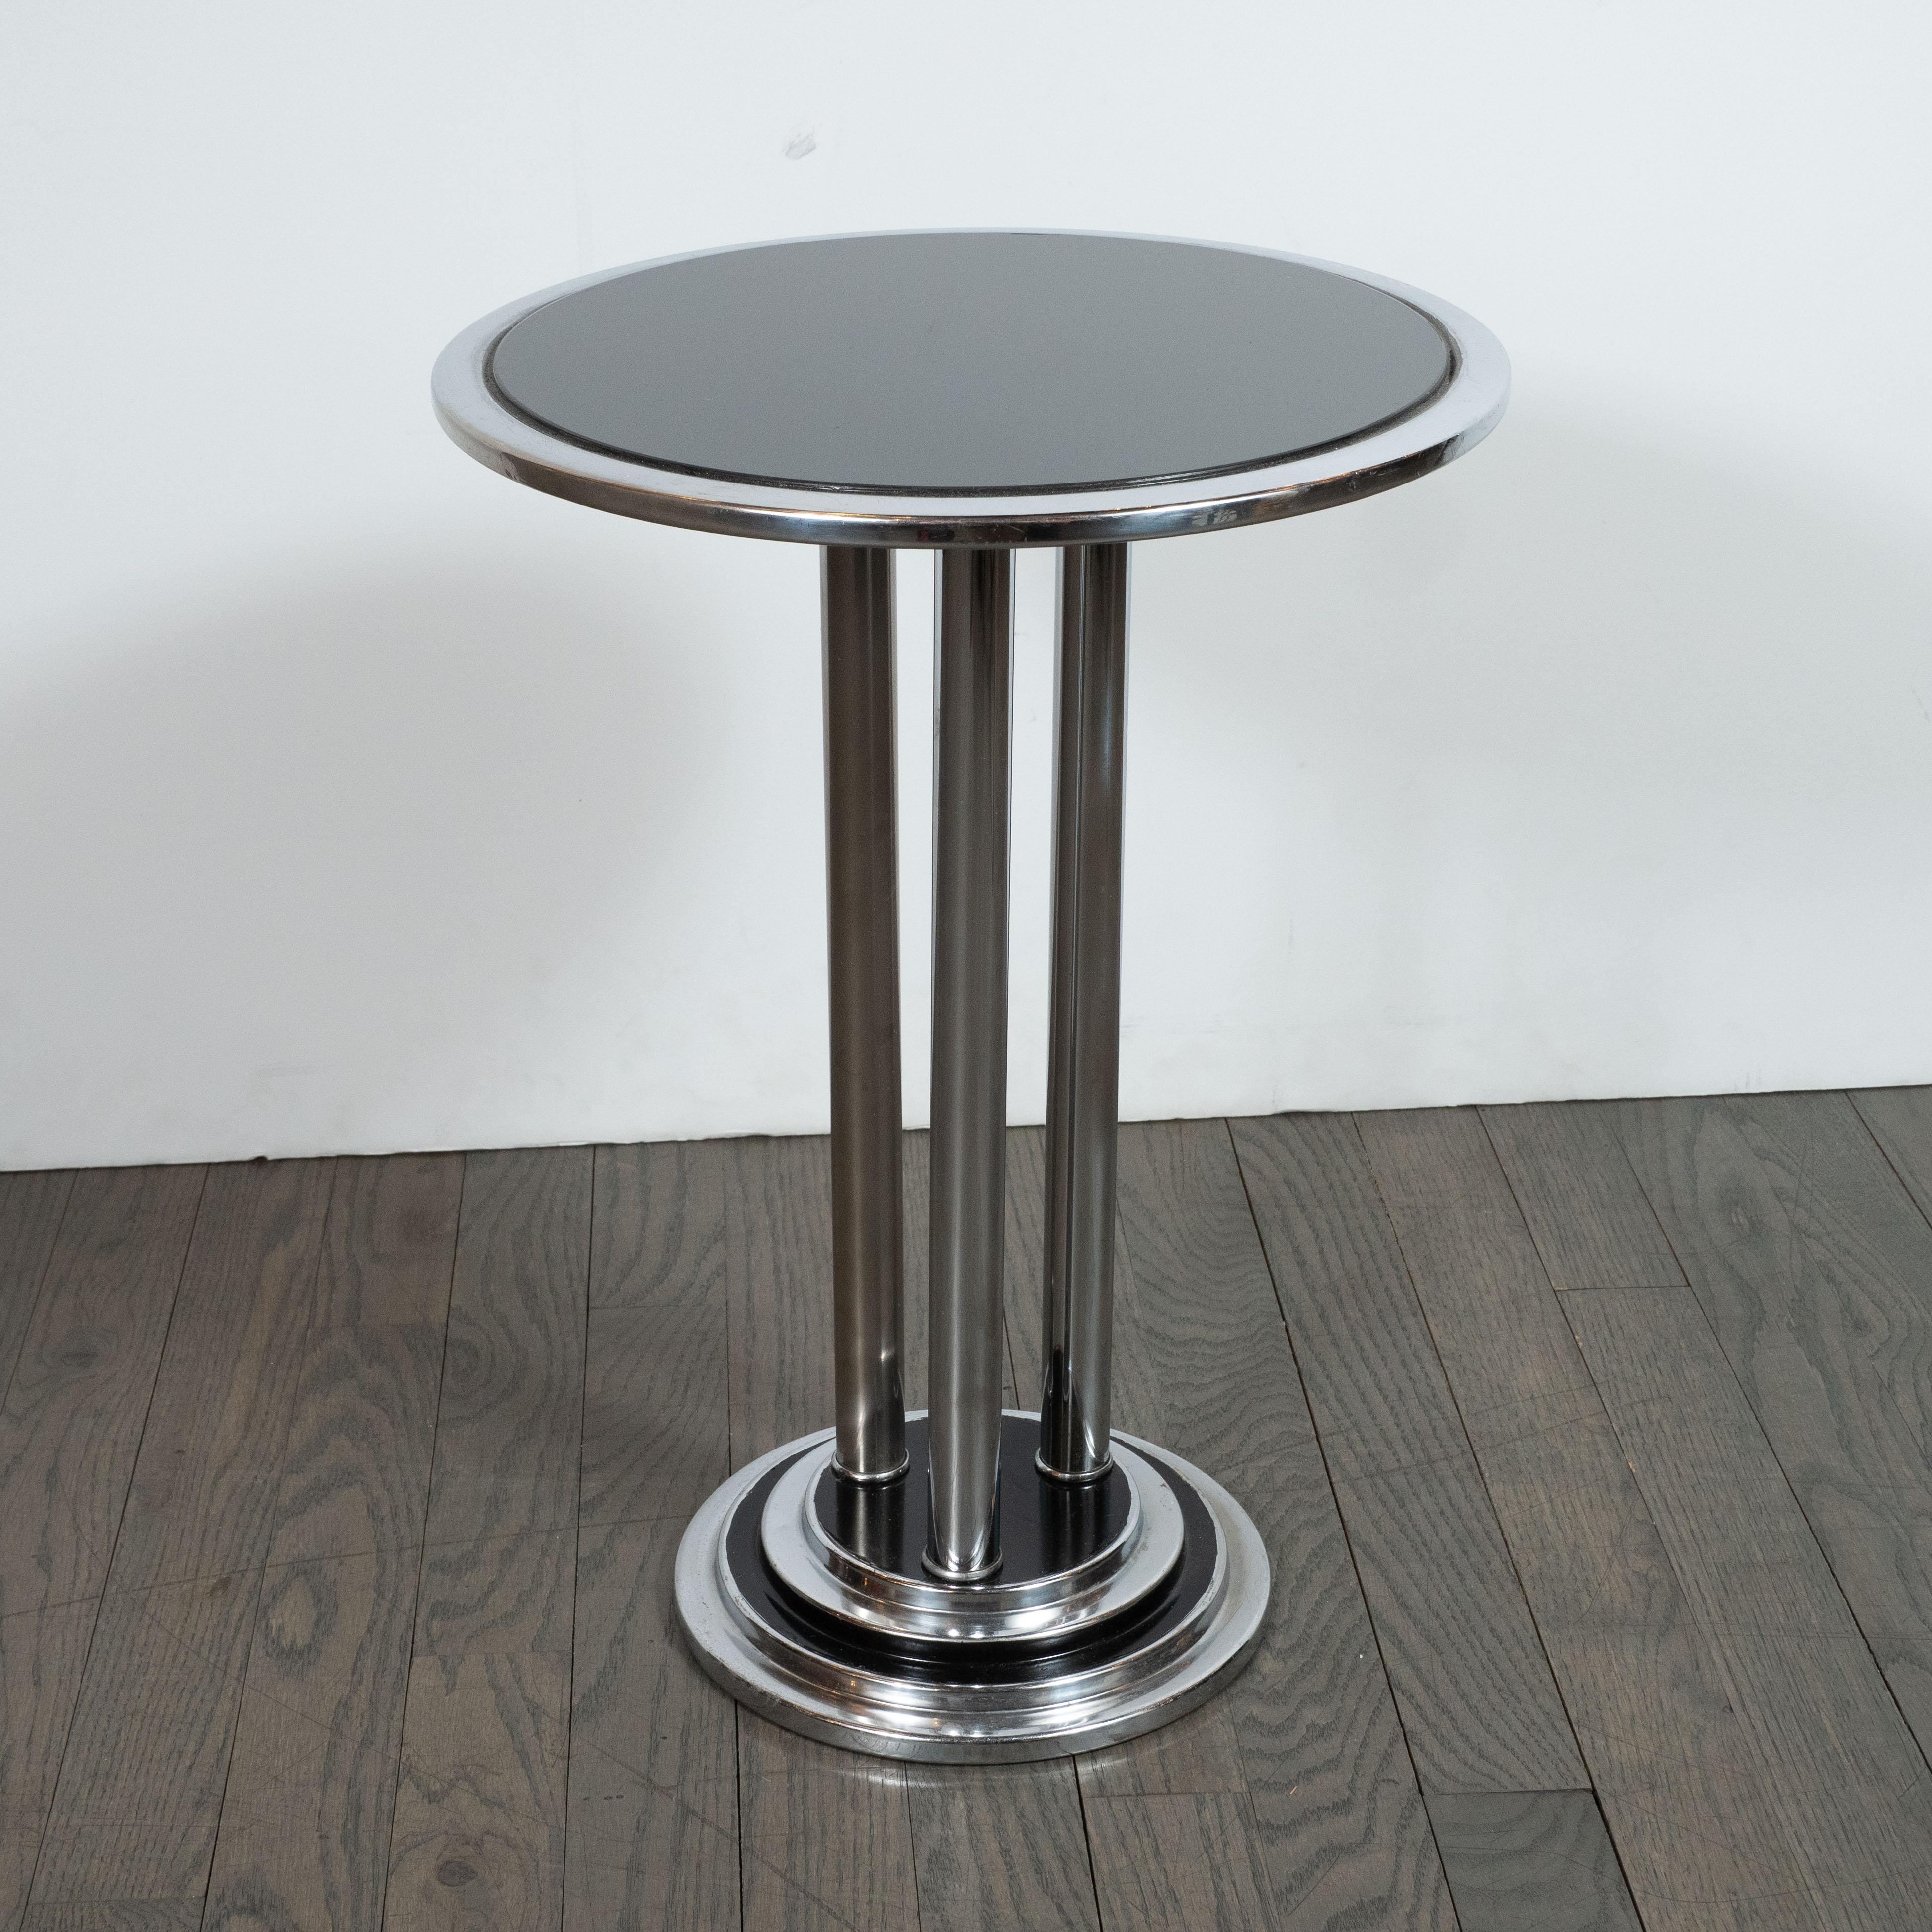 This sophisticated Machine Age Art Deco side table was designed in the United States, circa 1935. The table has a four-tier, stepped circular base. The tiers alternate between lustrous chrome and a high-gloss black enamel. Three chrome columns sit